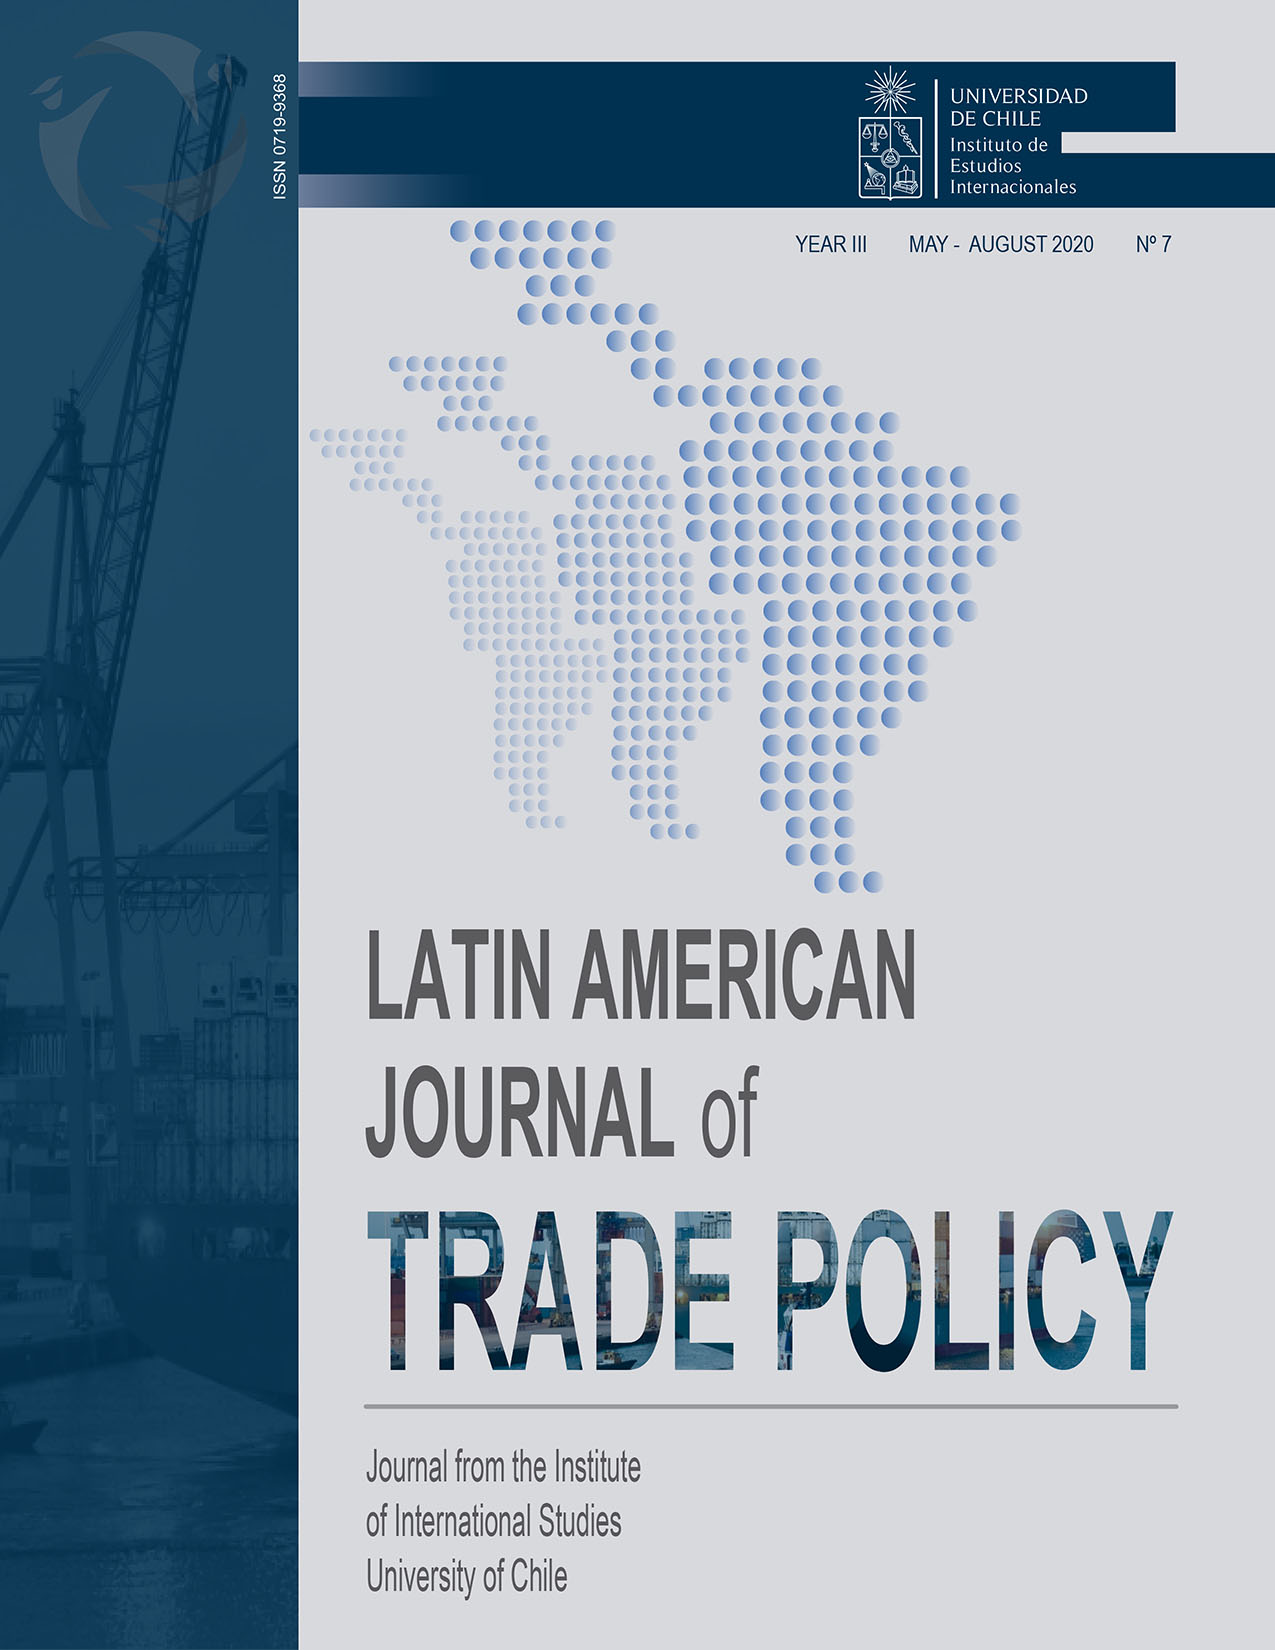 											View Vol. 3 No. 7 (2020): Latin American Journal of Trade Policy
										